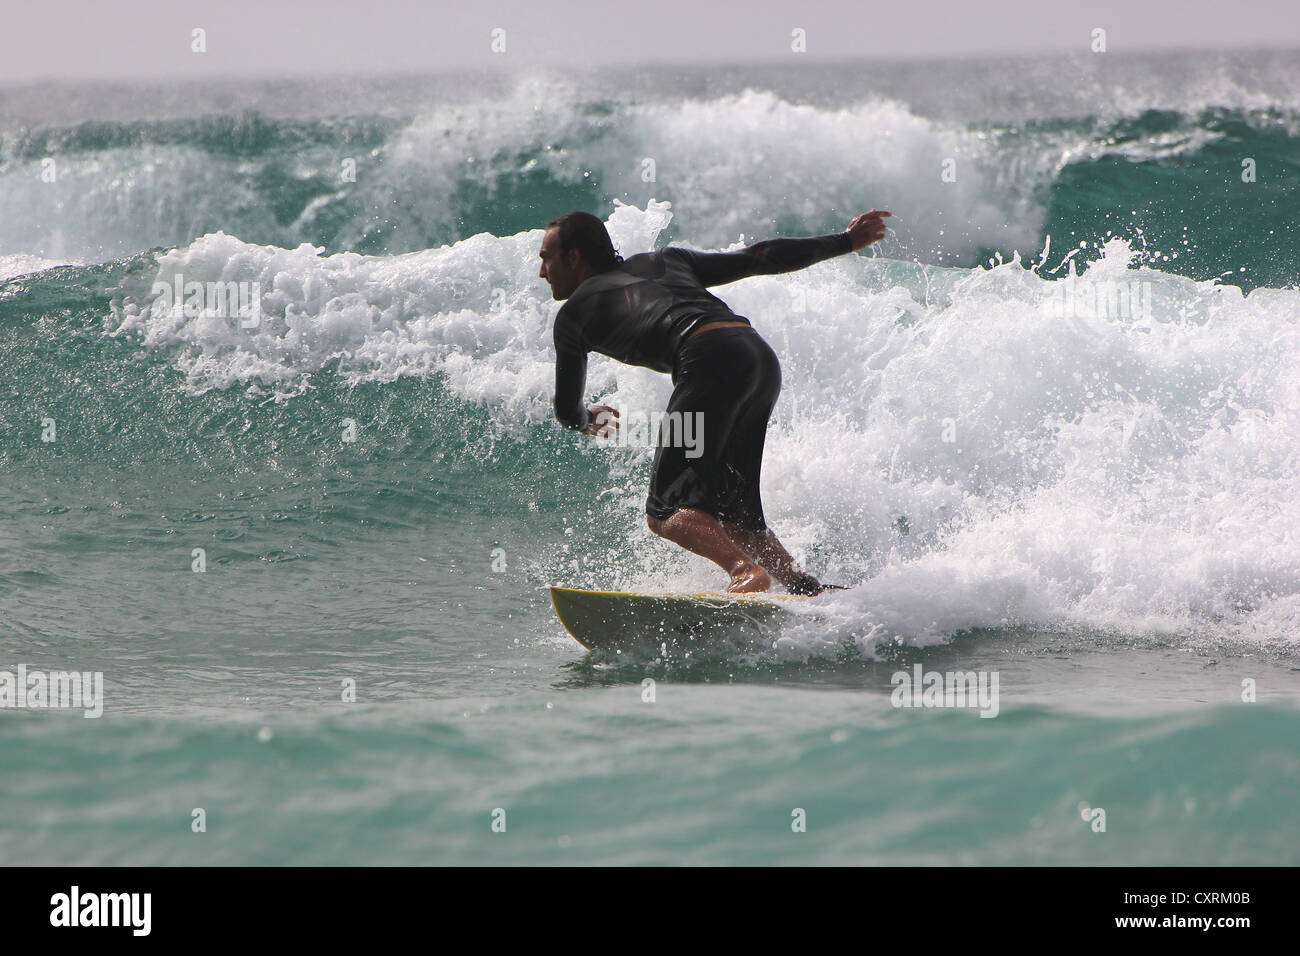 surfers, water, surf, seaside, sand, swell, waves, Canary Islands, Spain Stock Photo